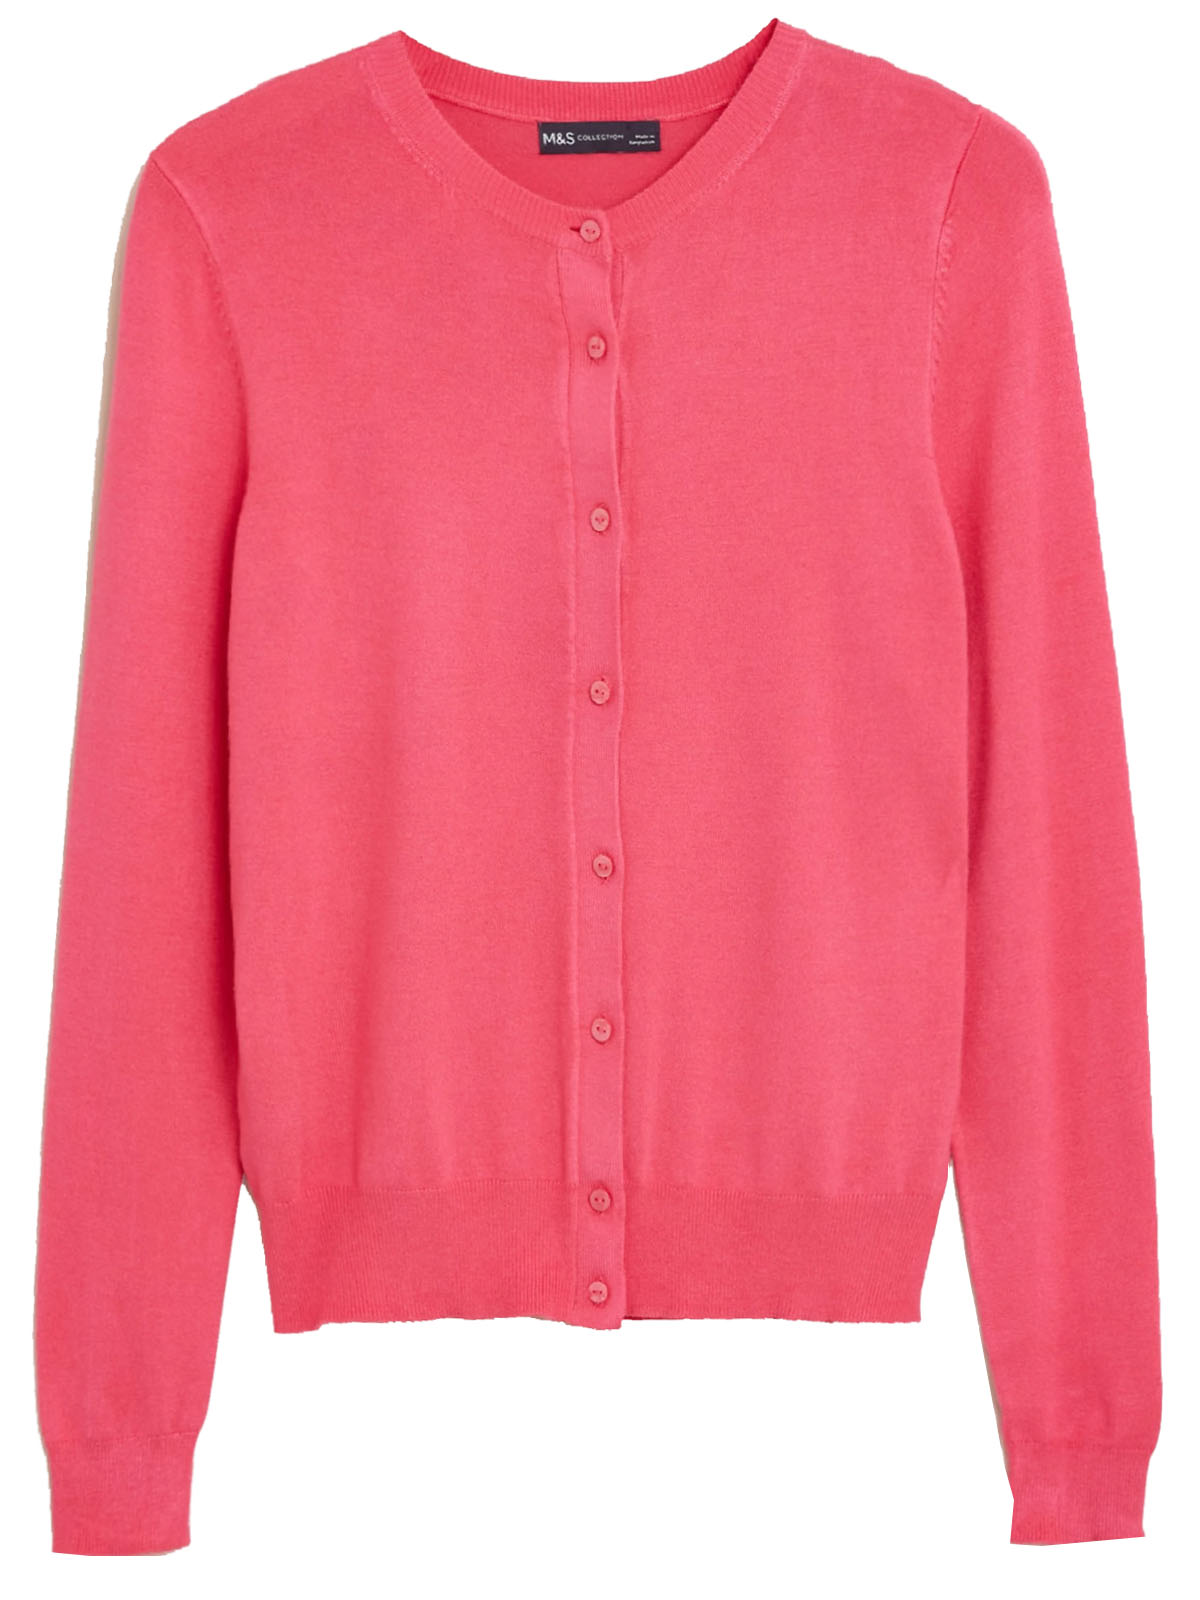 Marks and Spencer - - M&5 BRIGHT-PINK Crew Neck Cardigan - Size 6 to 24